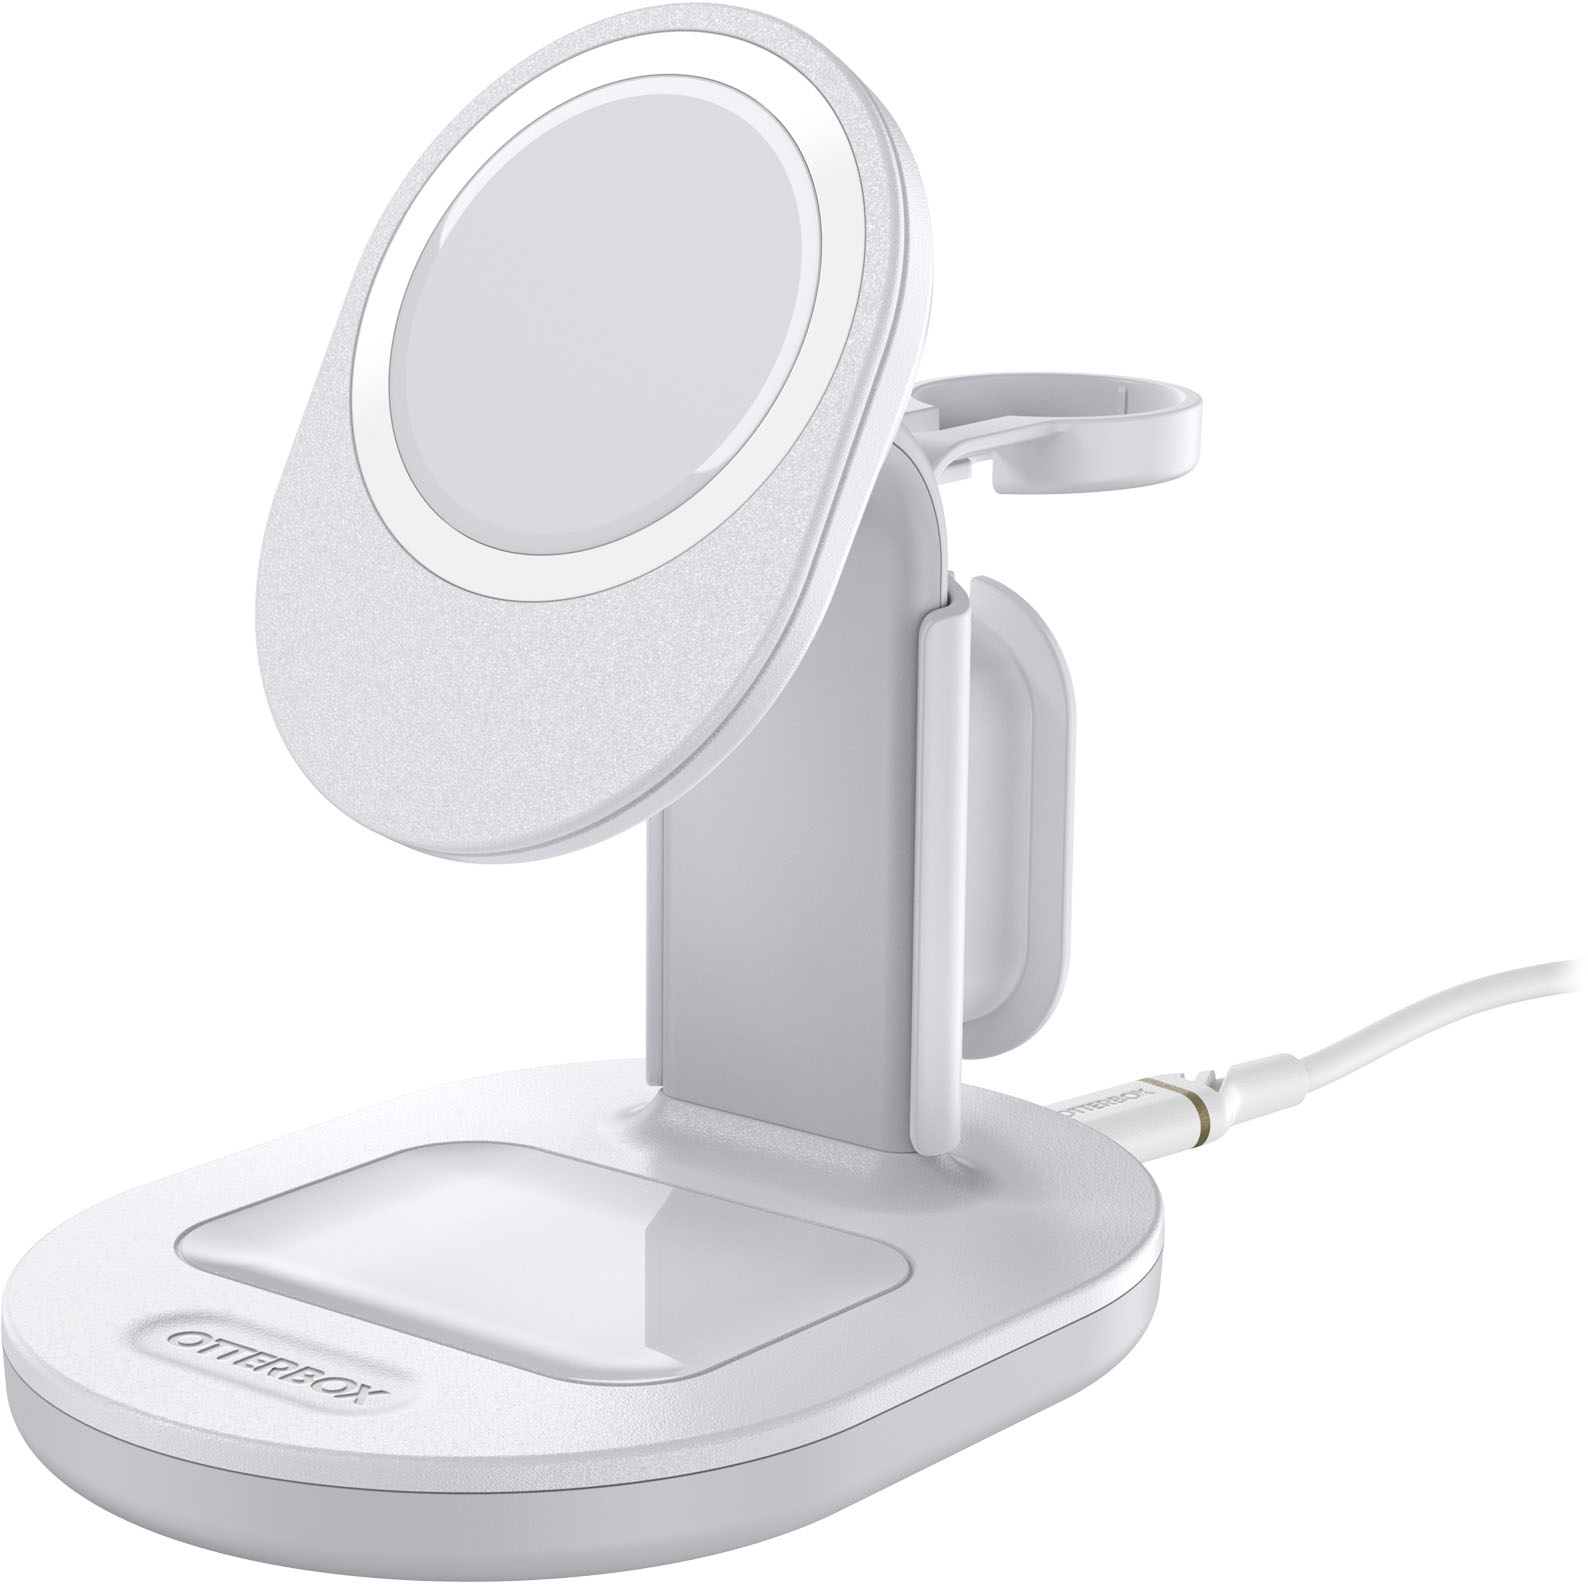 Oakland Raiders Wireless Charging Station and Bluetooth O7428699